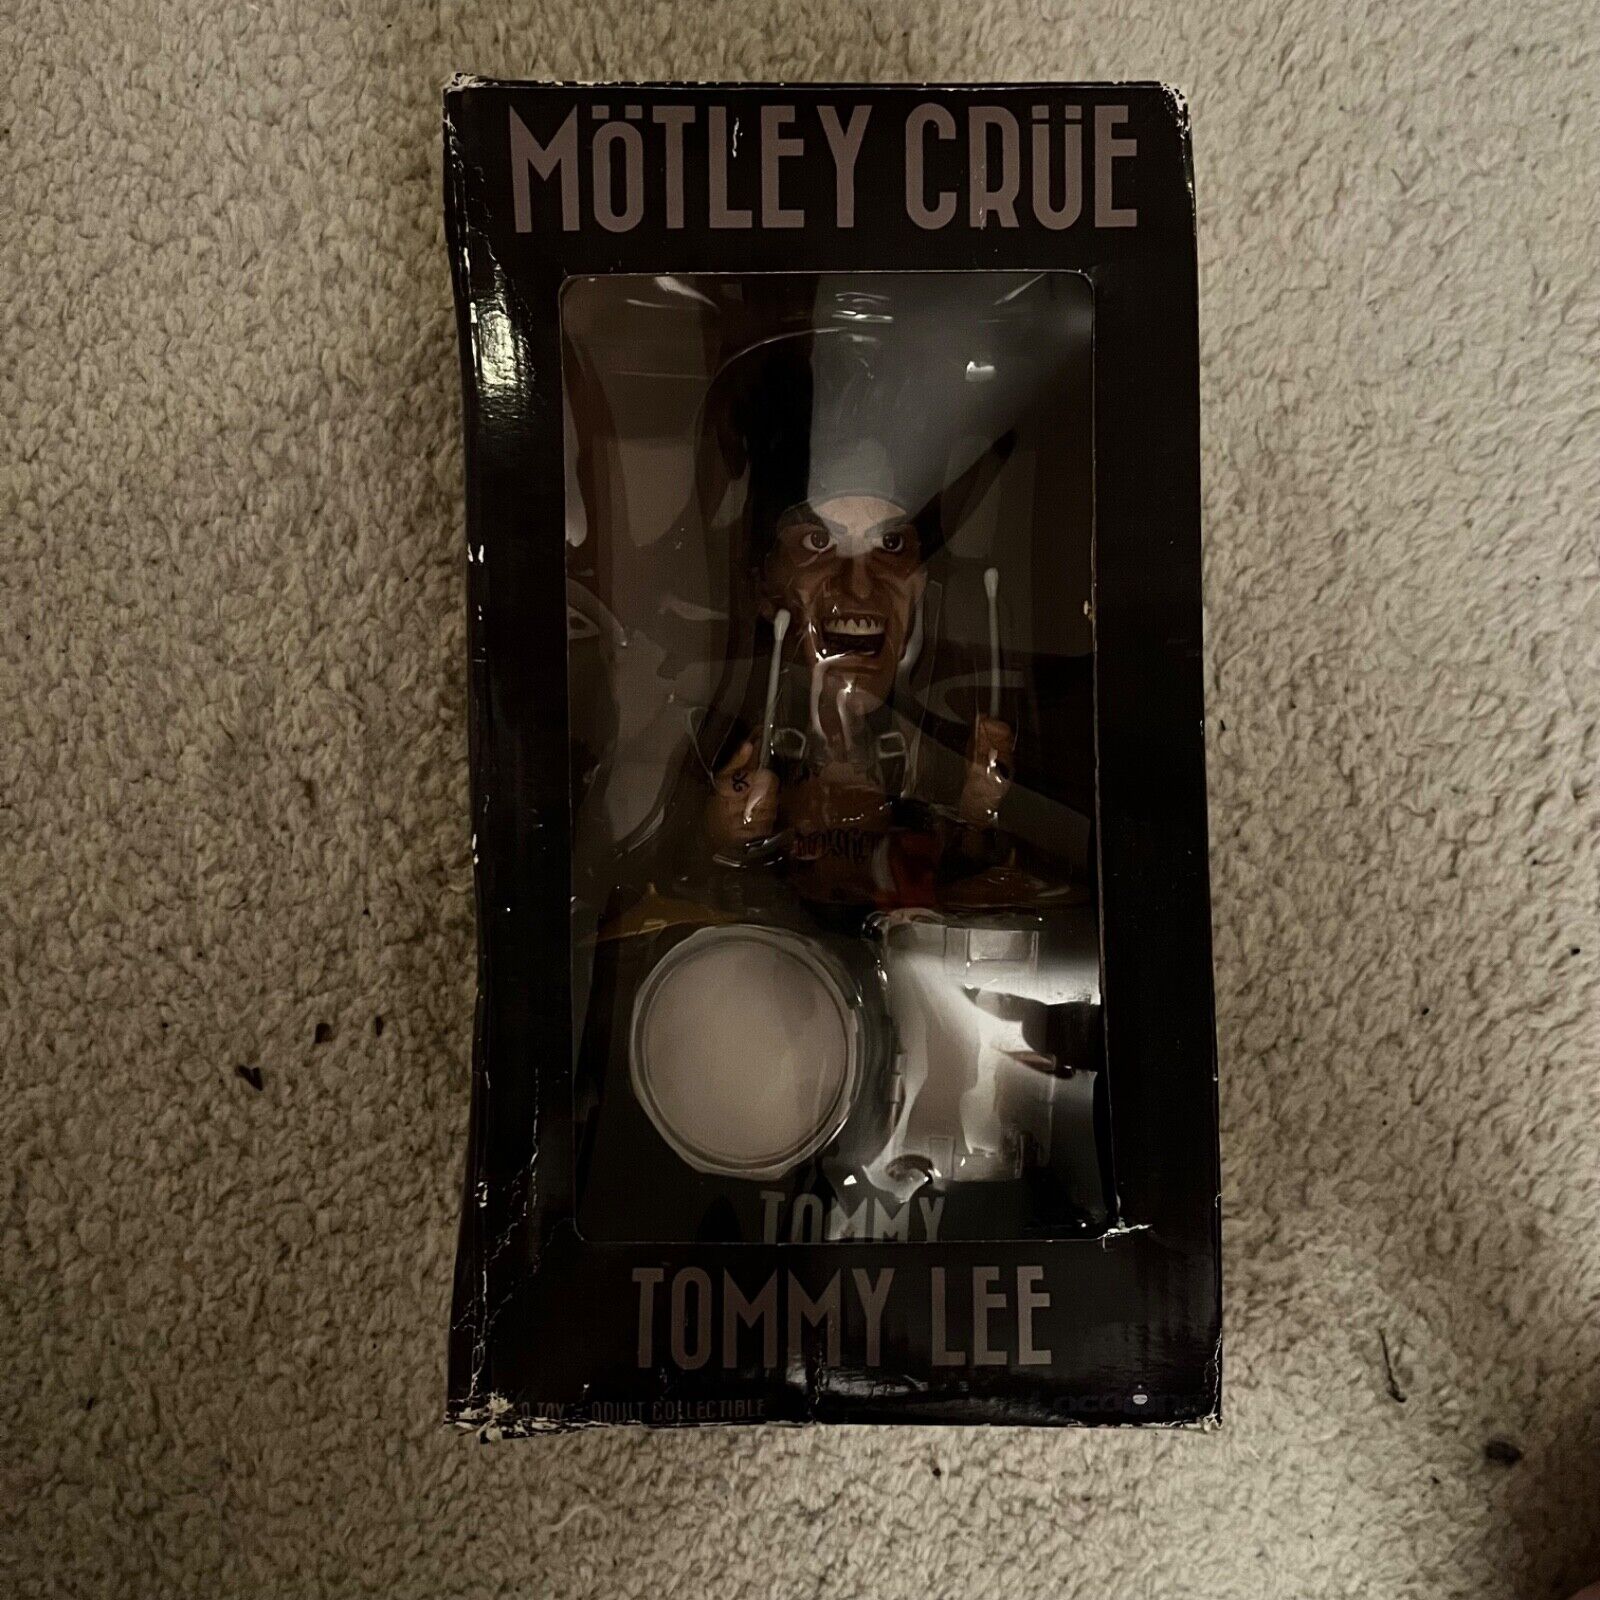 Tommy lee bobble head